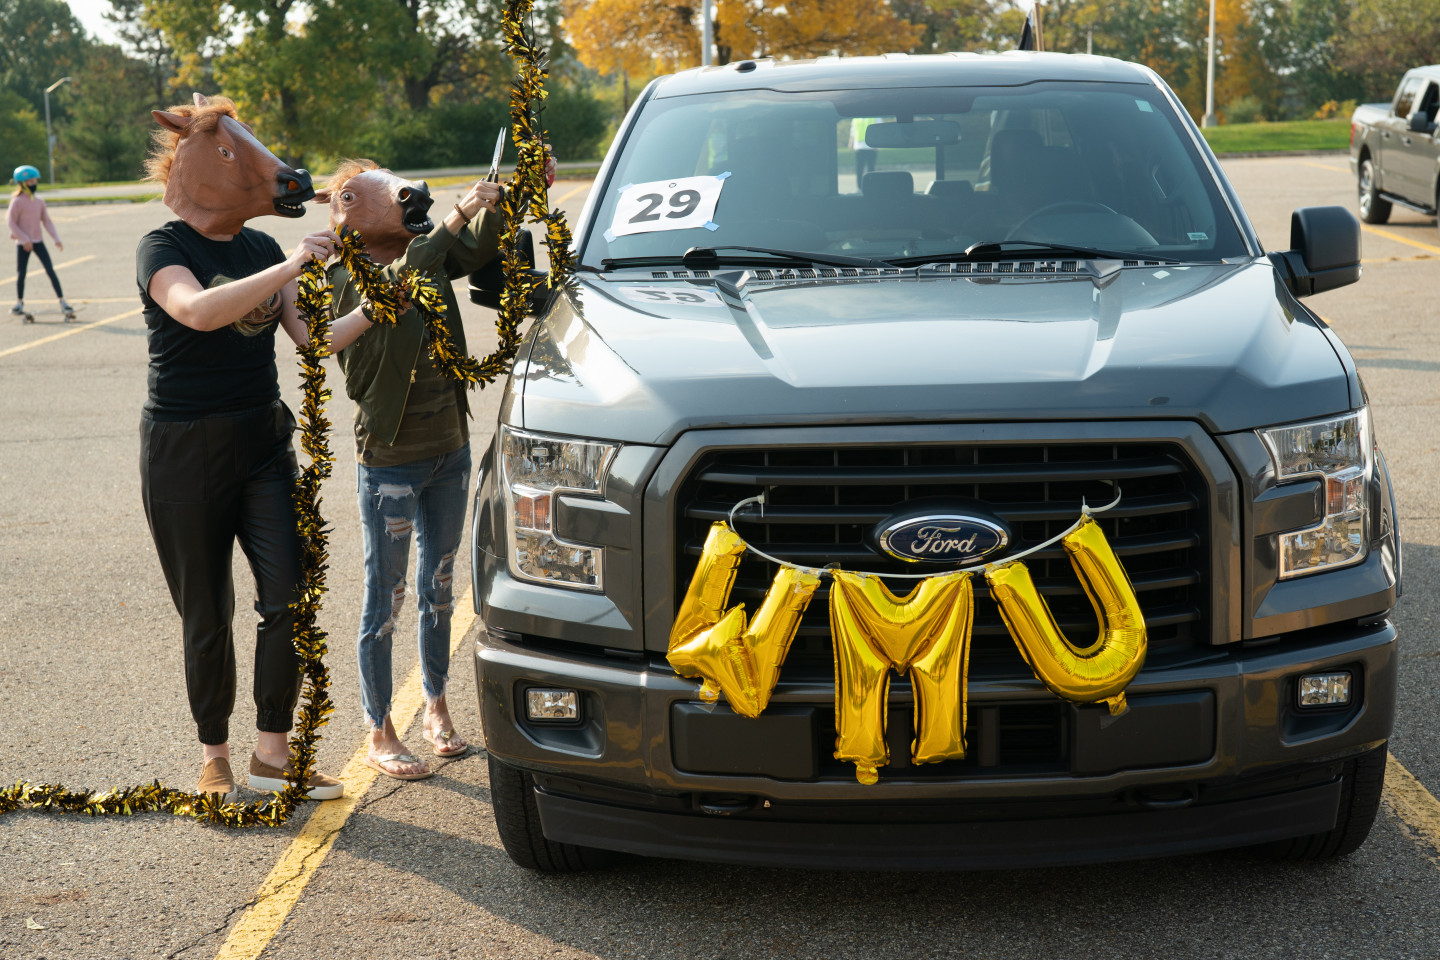 People in horse masks decorate a truck with WMU swag.